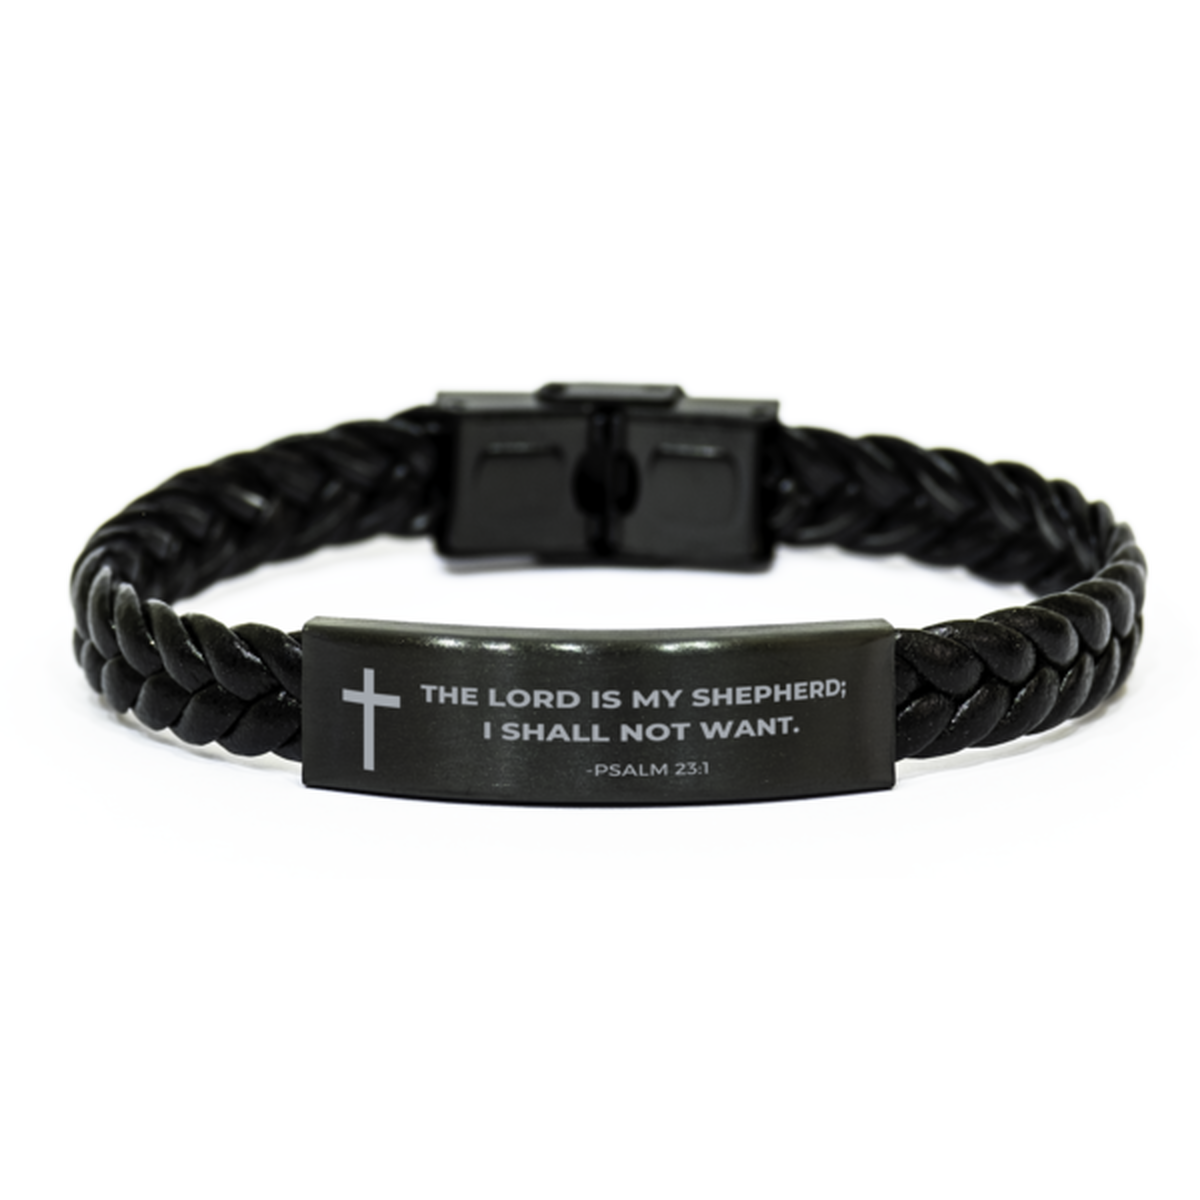 Baptism Gifts For Teenage Boys Girls, Christian Bible Verse Braided Leather Bracelet, The Lord is my shepherd, Catholic Confirmation Gifts for Son, Godson, Grandson, Nephew